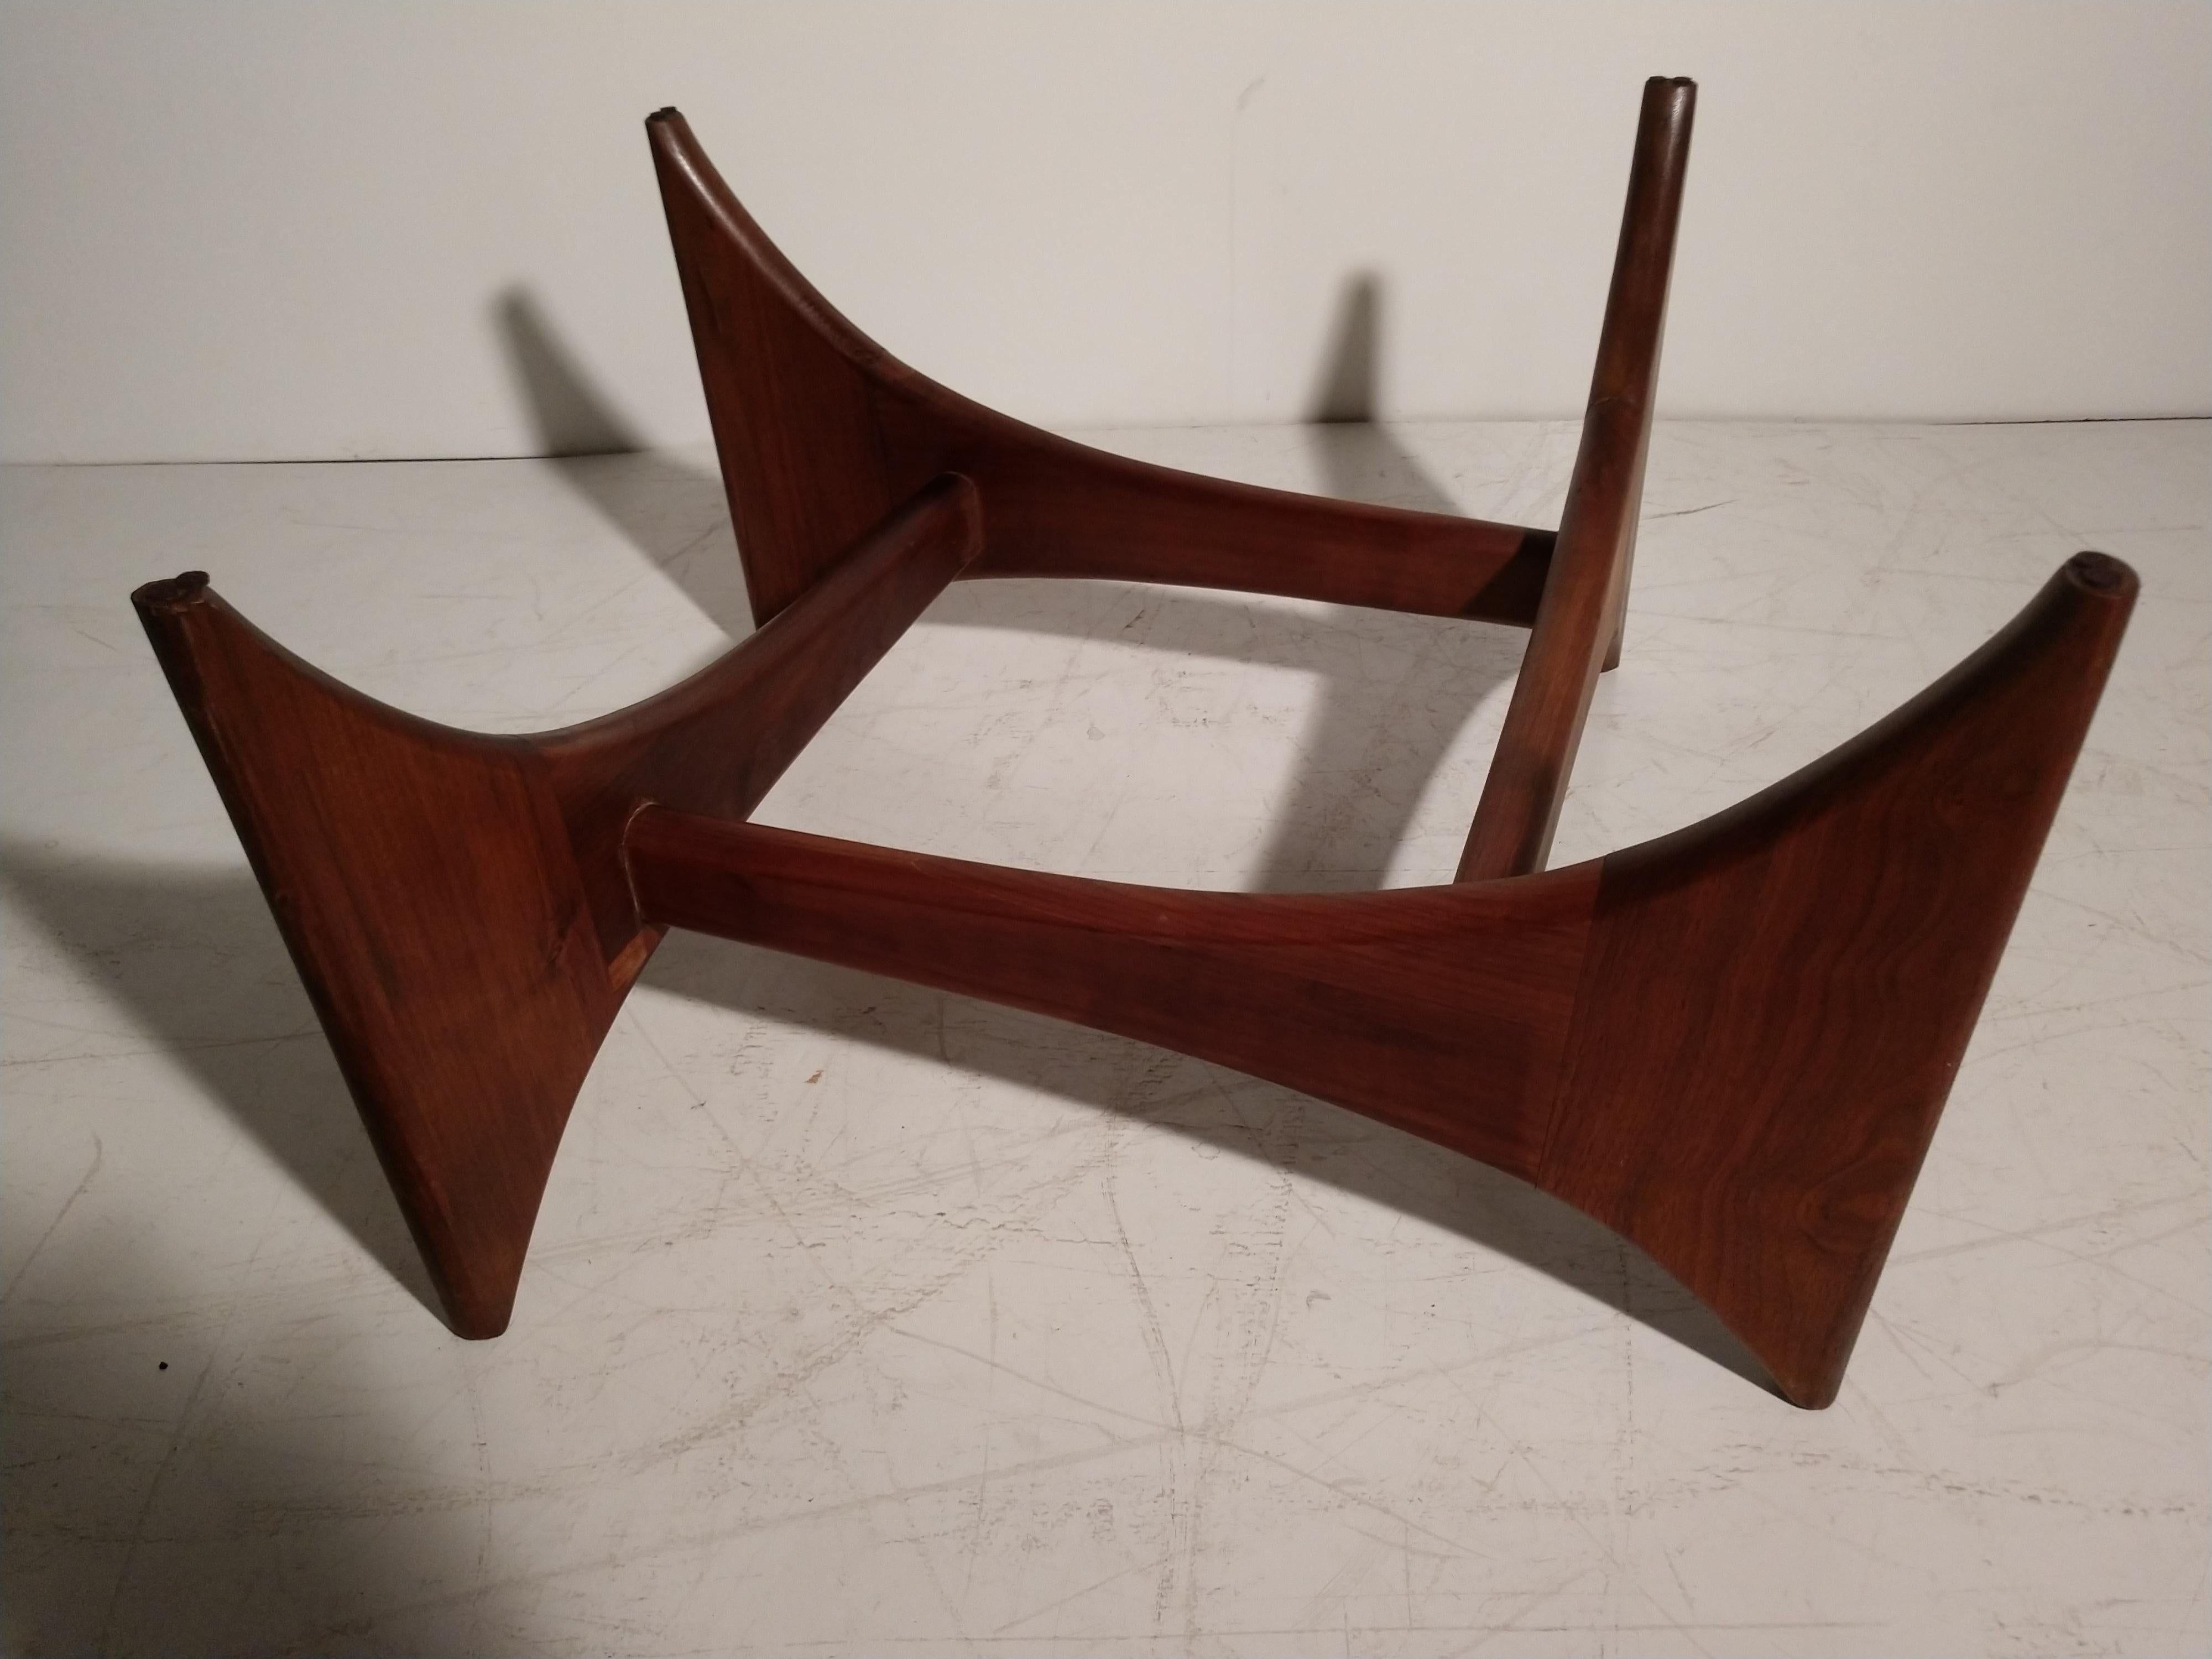 American Mid-Century Modern Adrian Pearsall Sculptural Walnut Cocktail Table